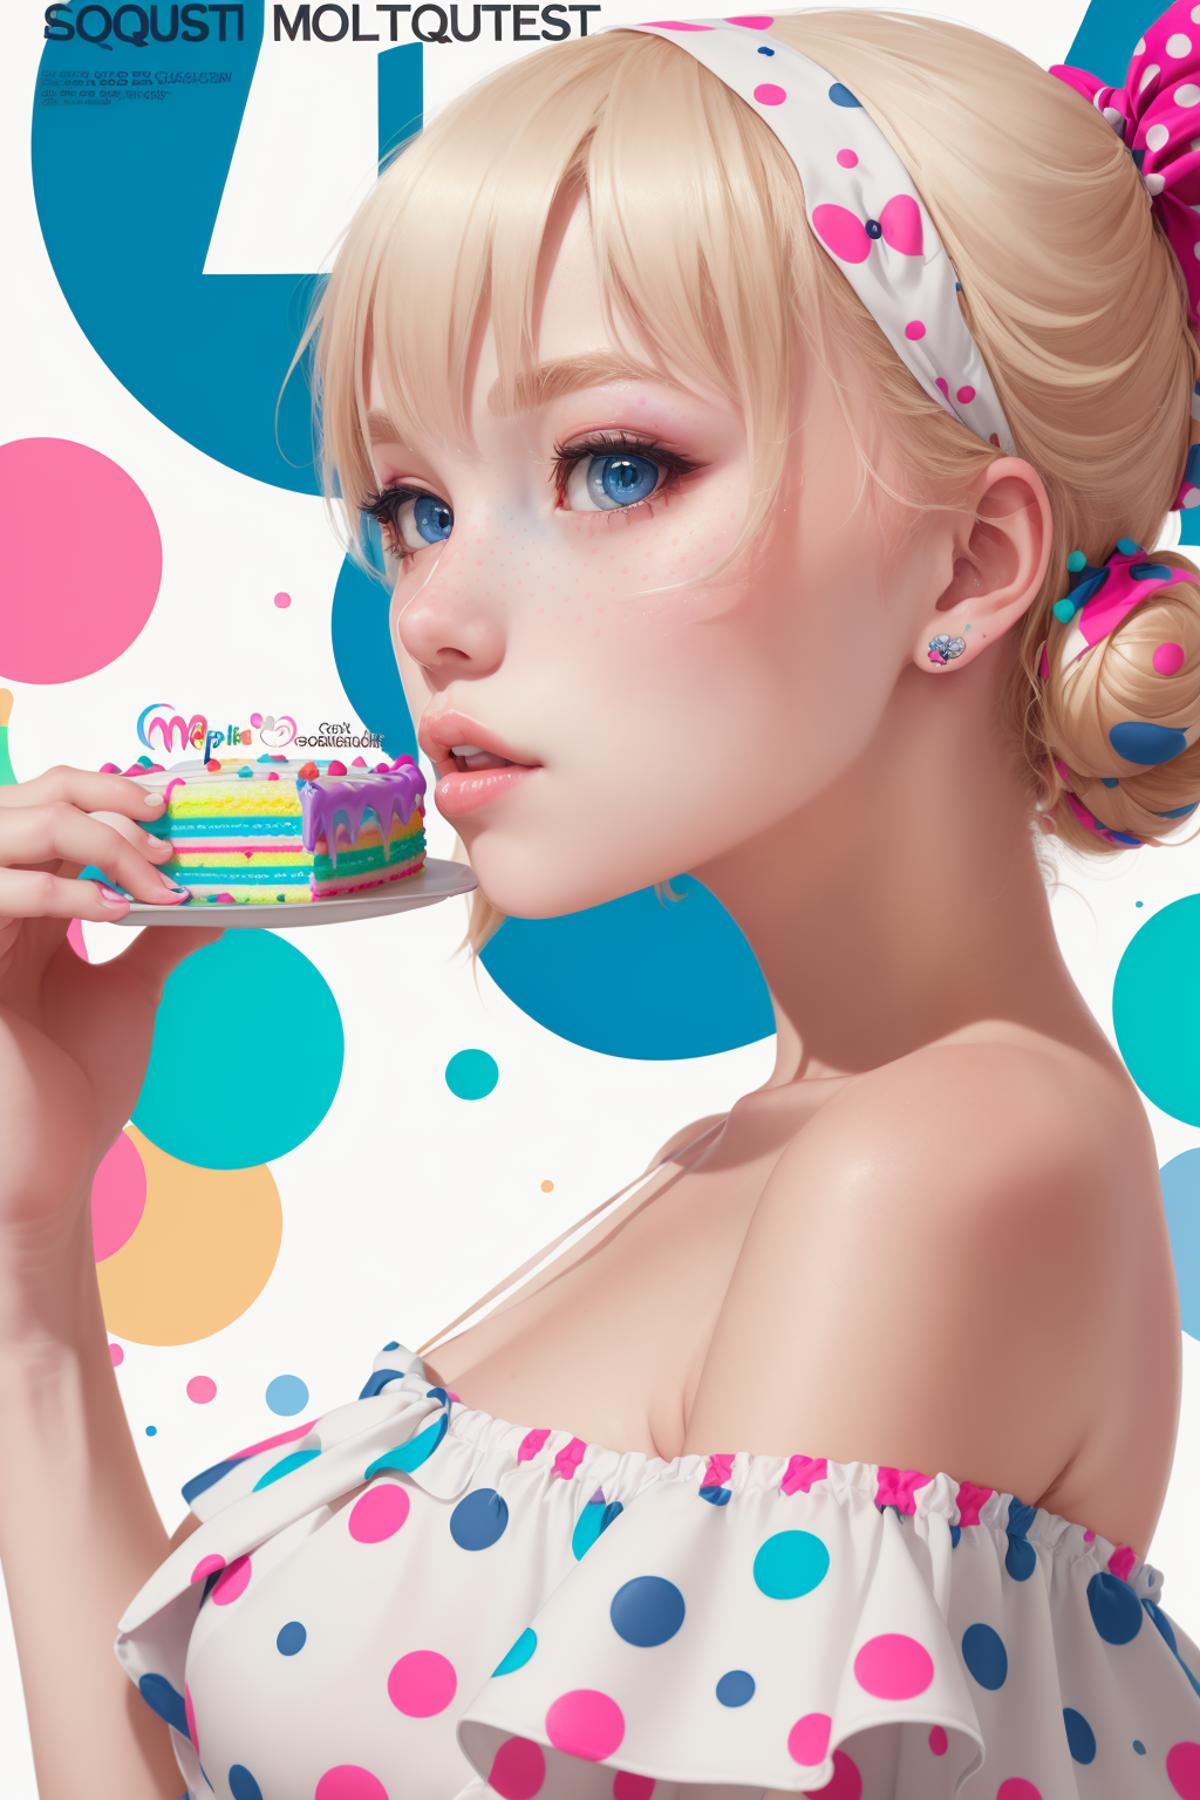 A 3D animated woman holding a colorful cake in a white dress.